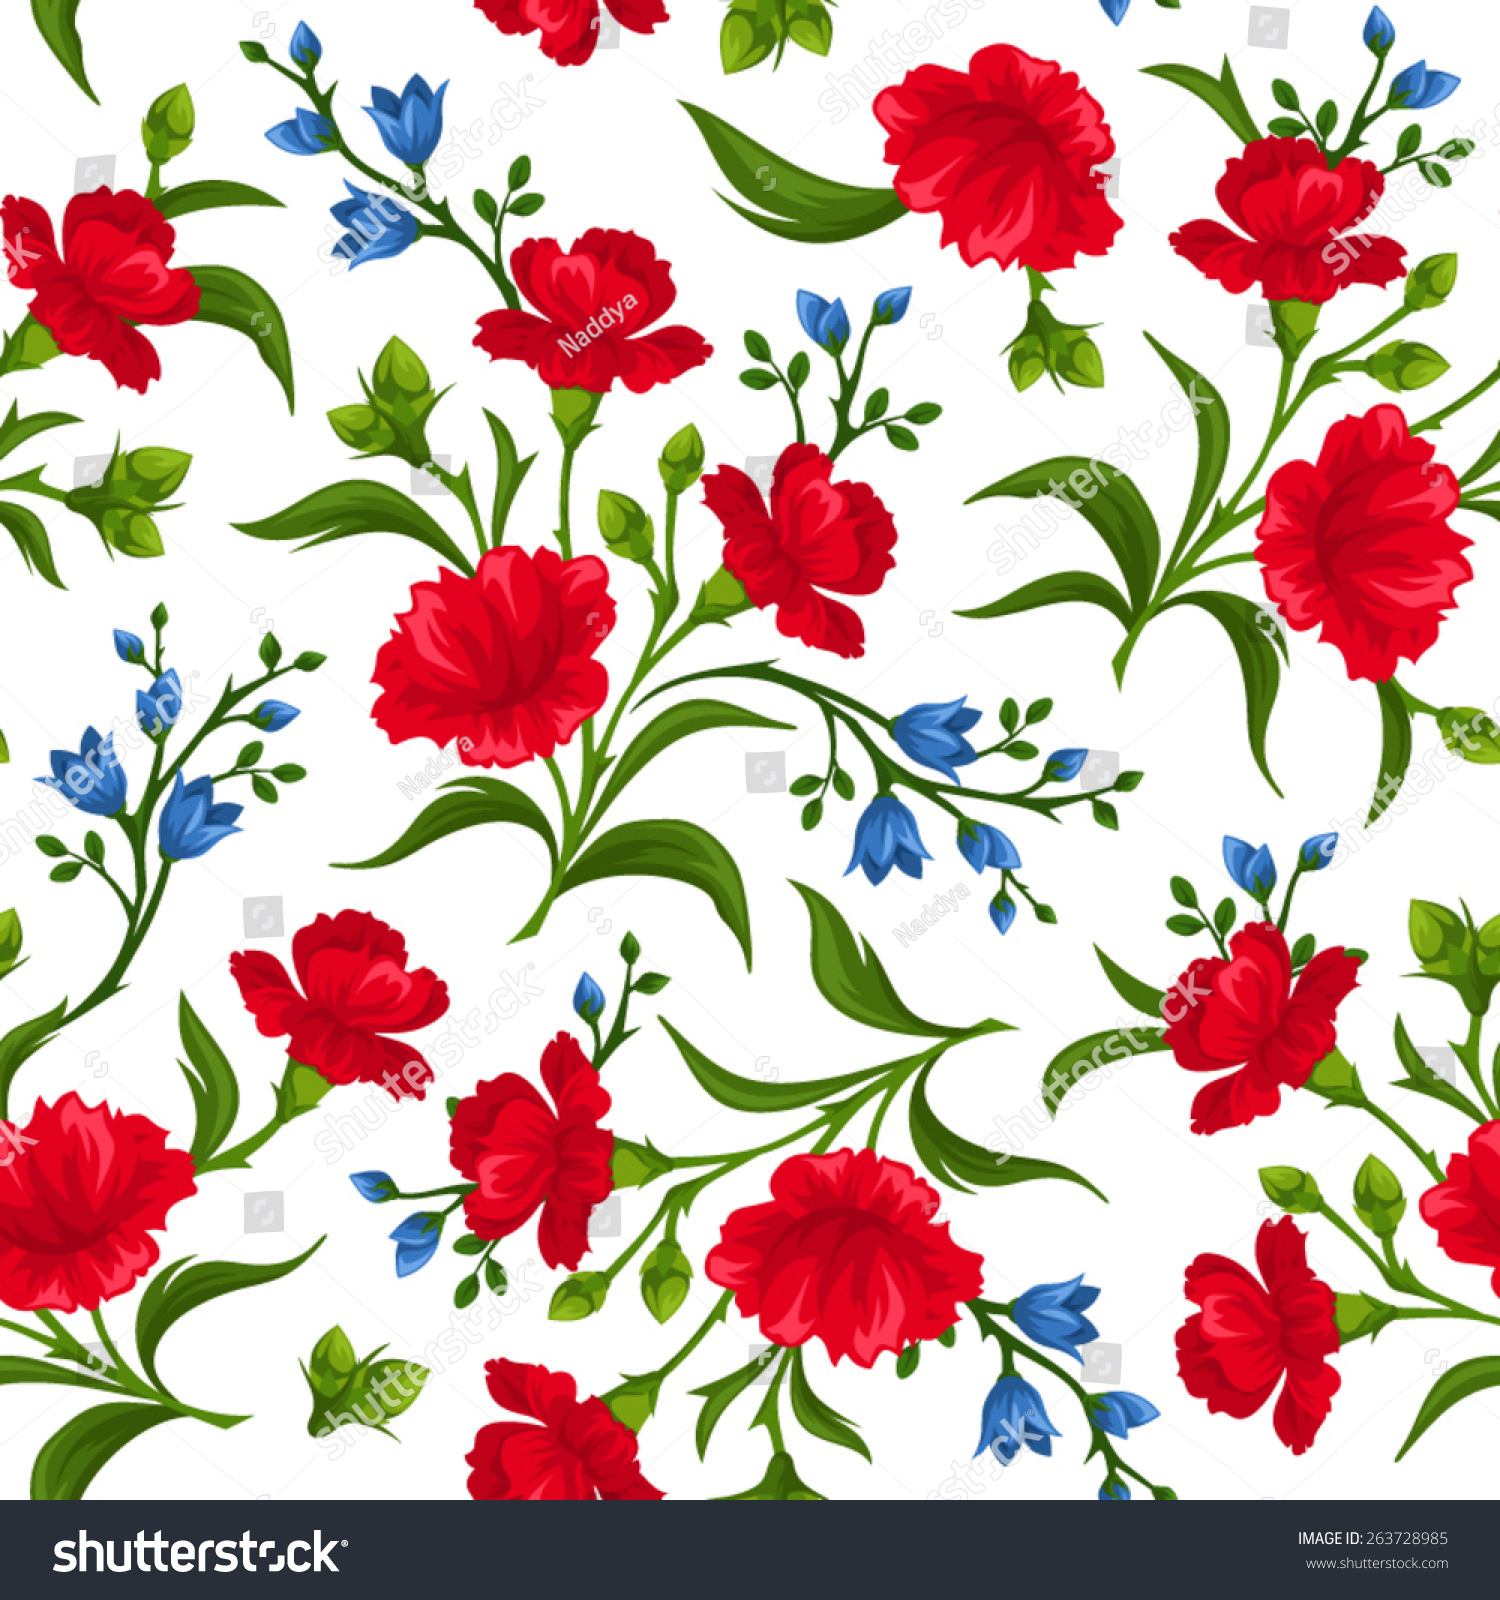 Vector Seamless Pattern Red Blue Flowers Stock Vector Royalty Free 263728985